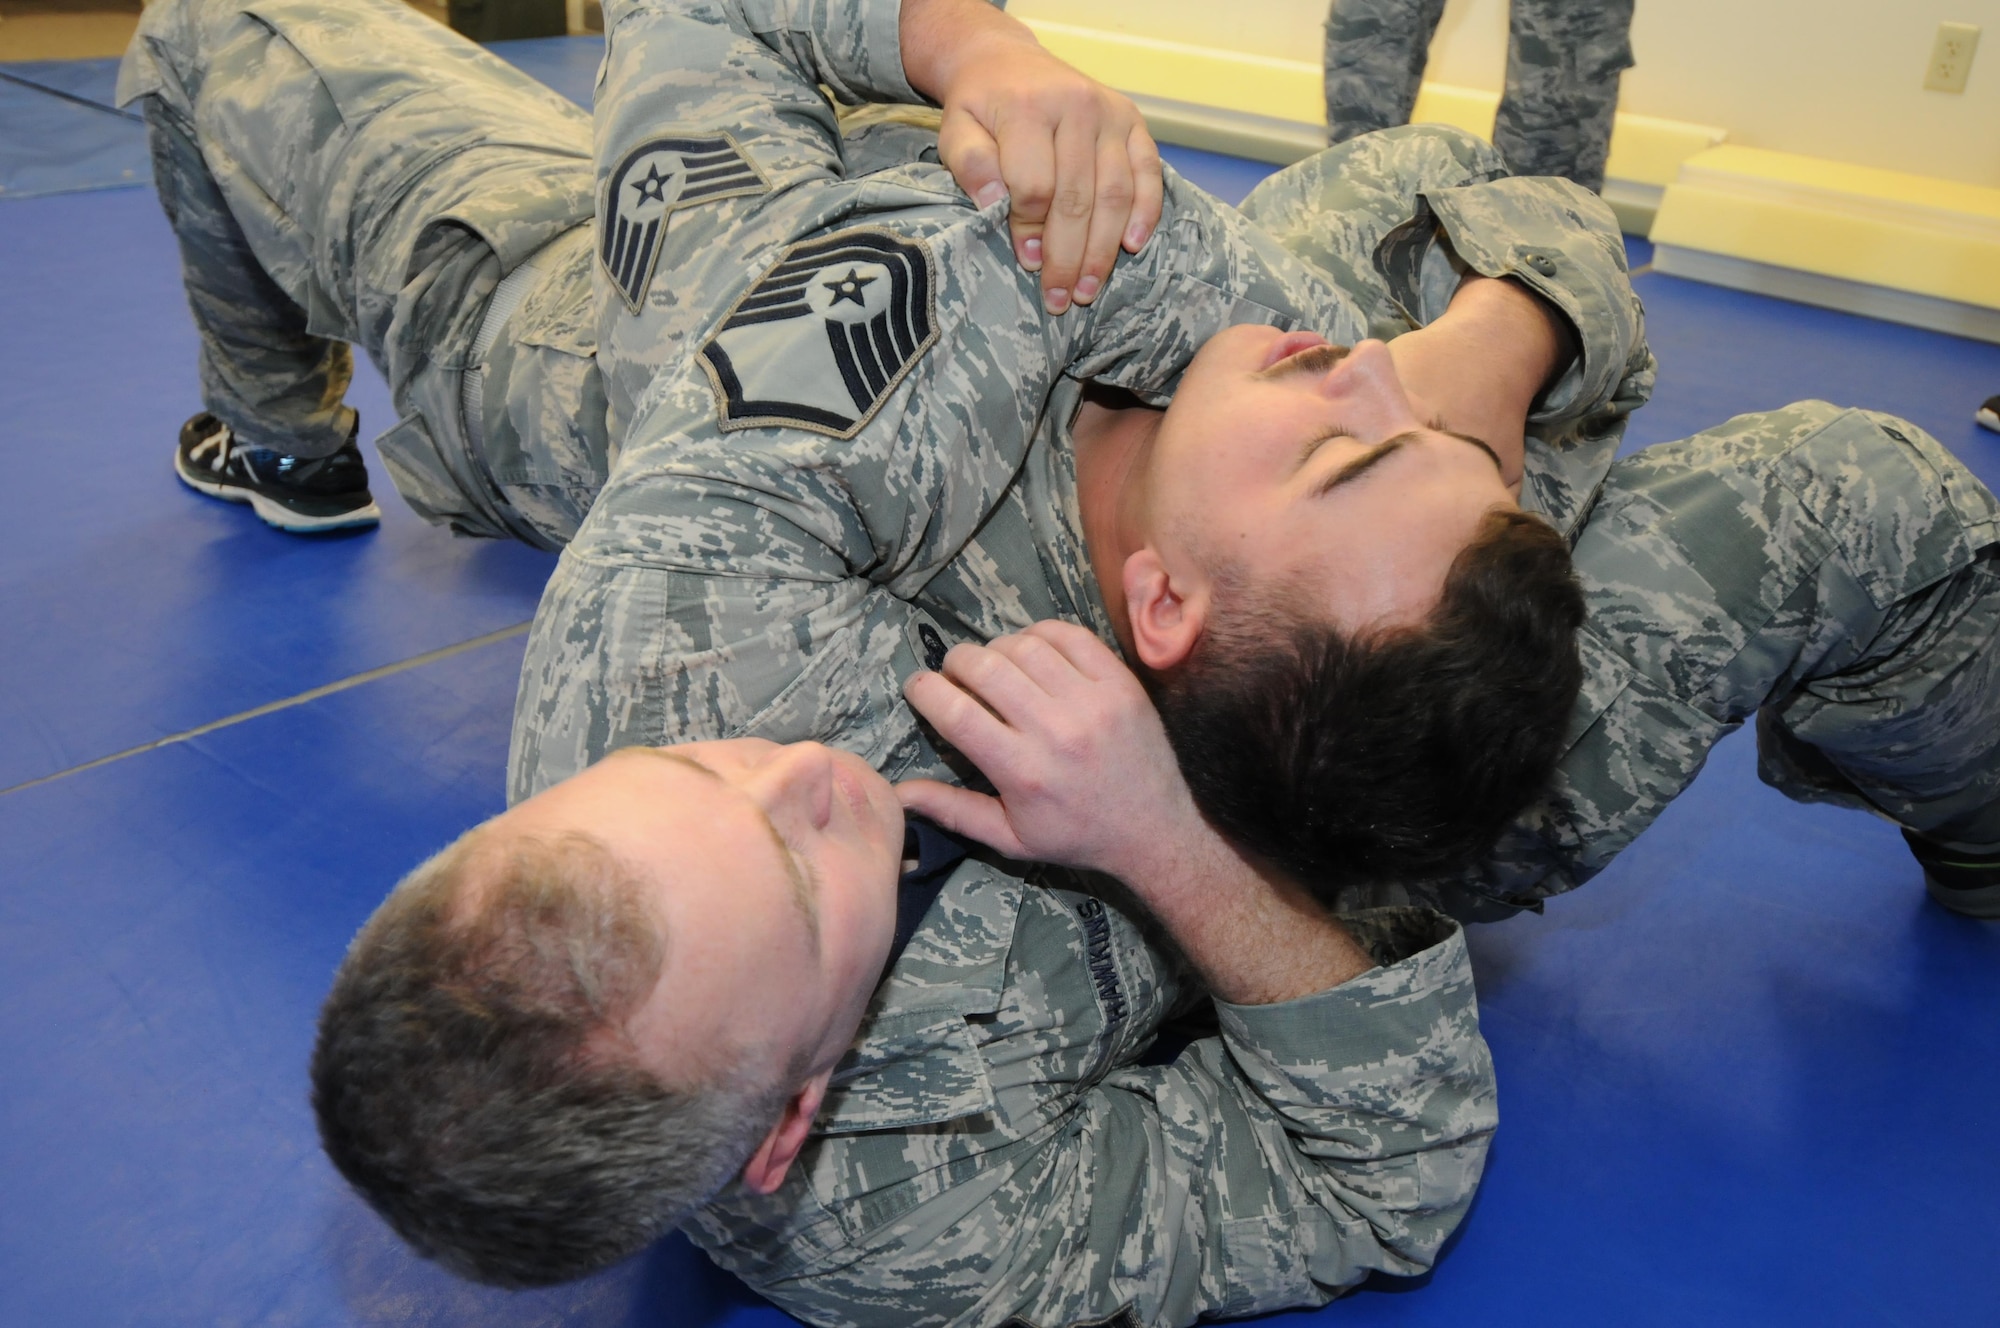 U.S. Air Force Staff Sgt. Cody Broussard, 173rd Security Forces Squadron, works against his assailant Master Sgt. Ross Hawkins, 173rd SFS, in a demonstration of Air Force Security Forces Combatives where an officer works to extract themselves from a choke hold, Jan. 13, 2017 at Kingsley Field in Klamath Falls, Oregon. Combatives training helps security forces members protect themselves in a hand-to-hand situation by using leverage to extract themselves from a bad situation or to quickly subdue an attacker without causing harm. (U.S. Air National Guard photo by Tech. Sgt. Jefferson Thompson)